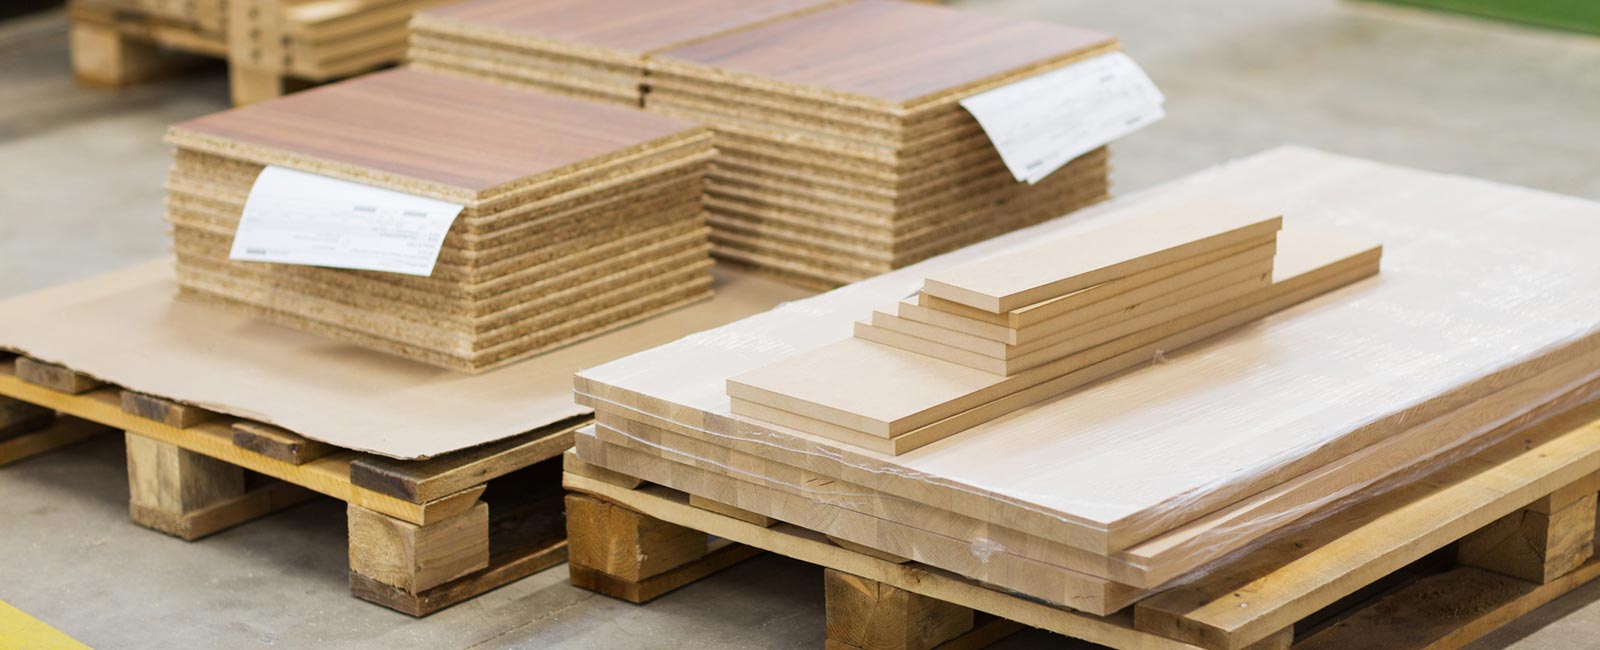 mdf-vs-plywood-which-should-you-use-for-your-next-project